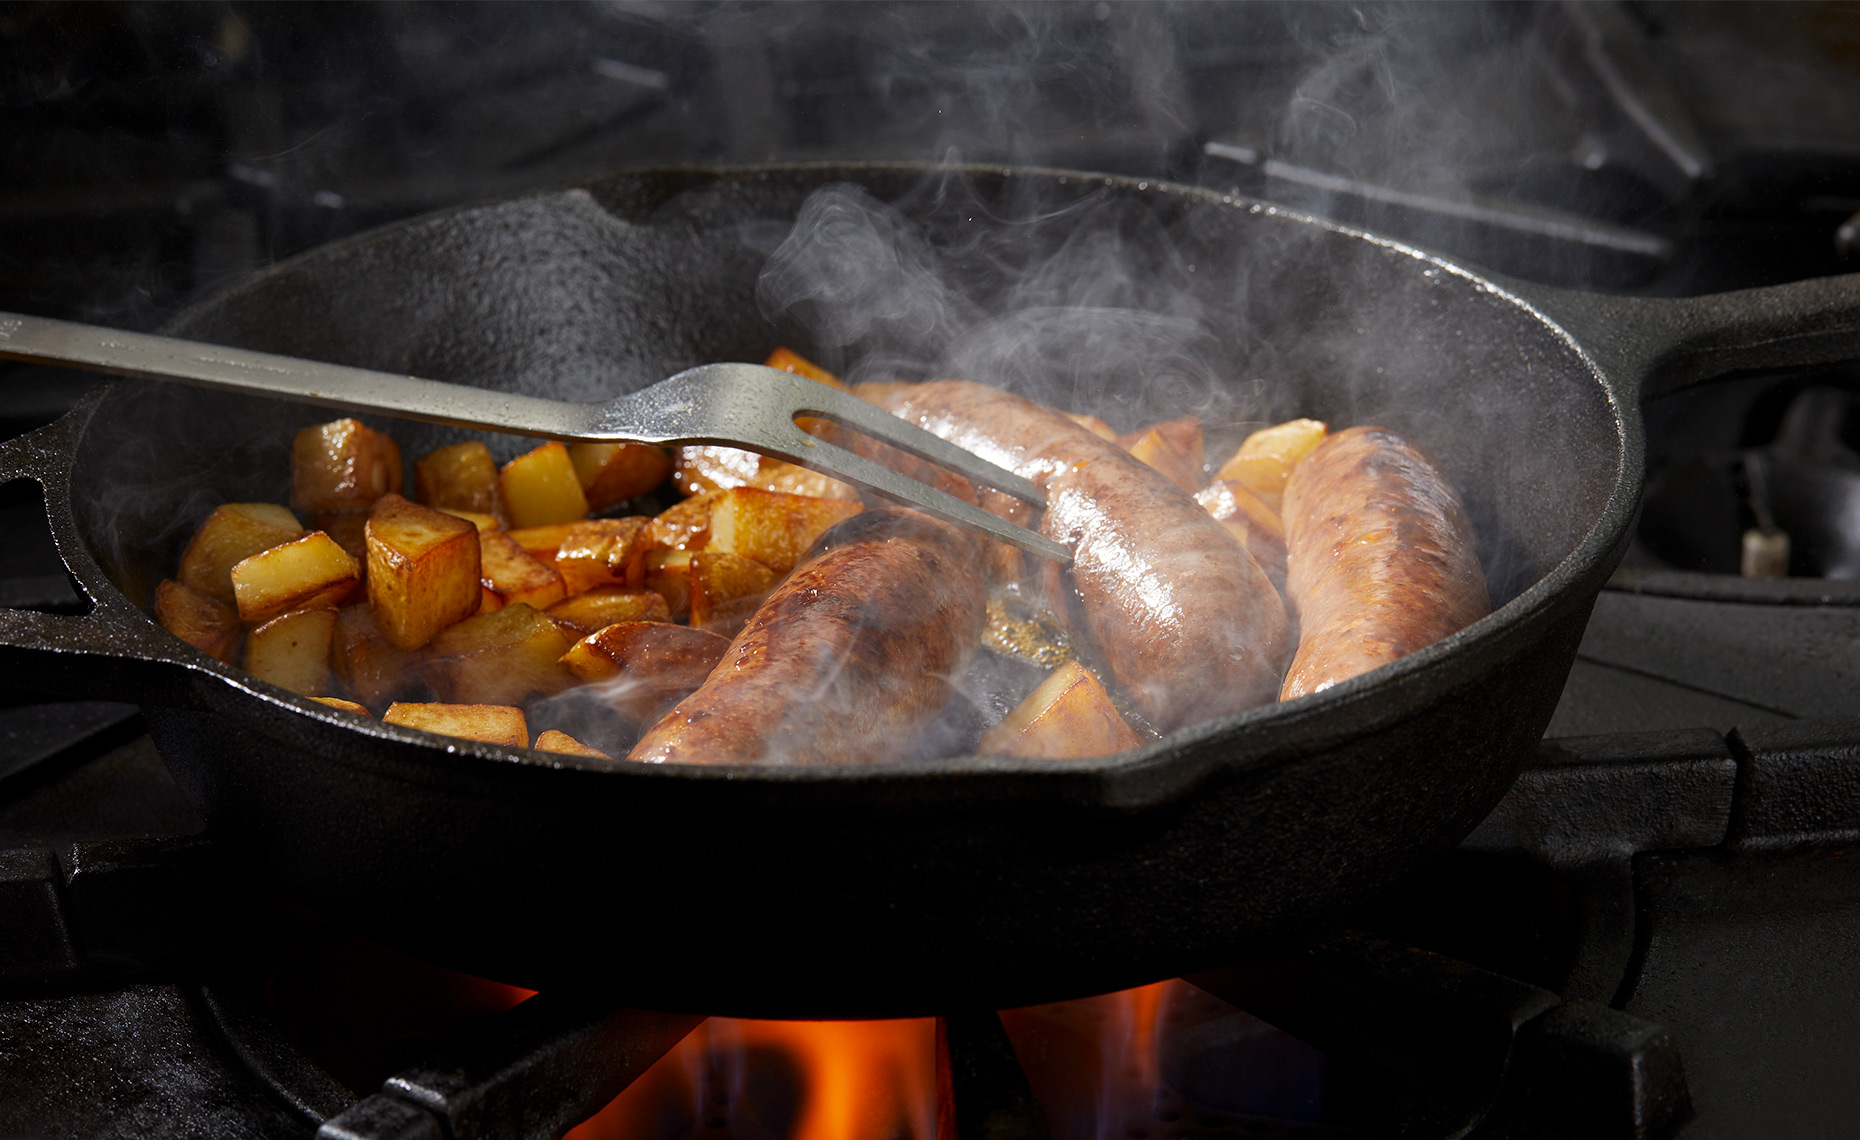 Sausage and potatoes cooking in cast iron pan